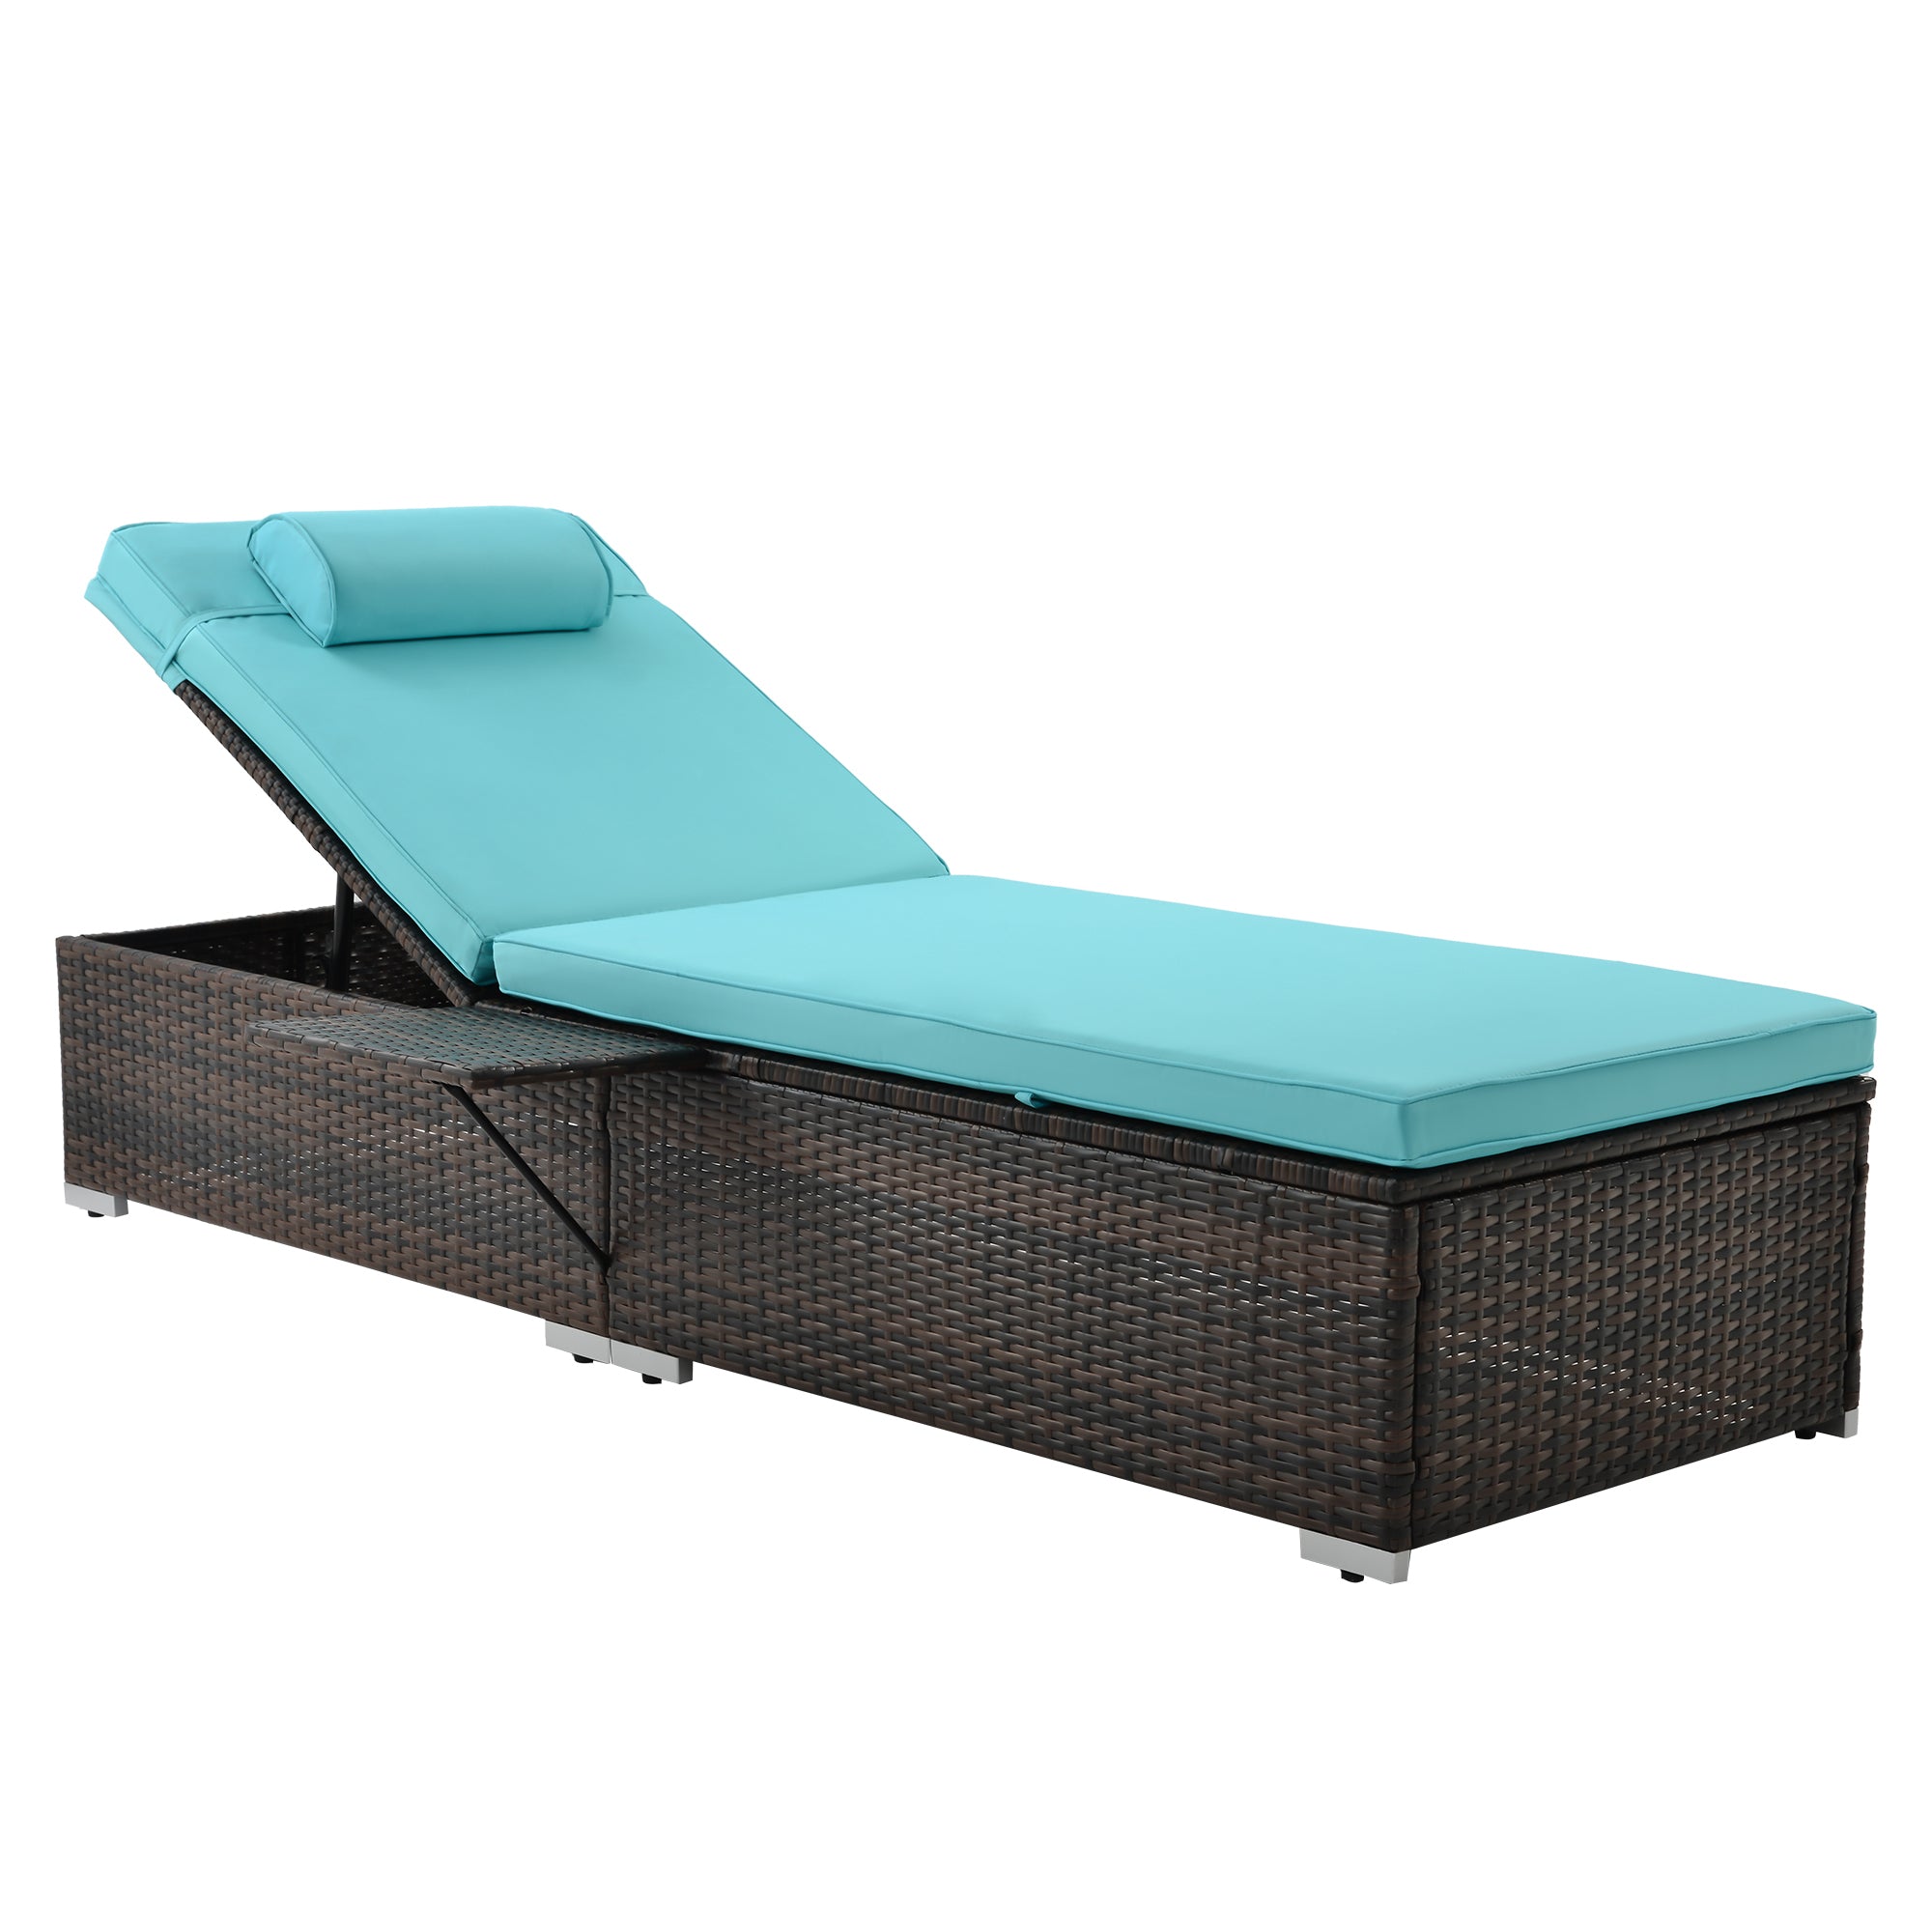 SAME AS W213S00075: Outdoor PE Wicker Chaise Lounge - 2 Piece patio lounge chair; chase longue; lazy boy recliner;outdoor lounge chairs set of 2;beach chairs; recliner chair with side table